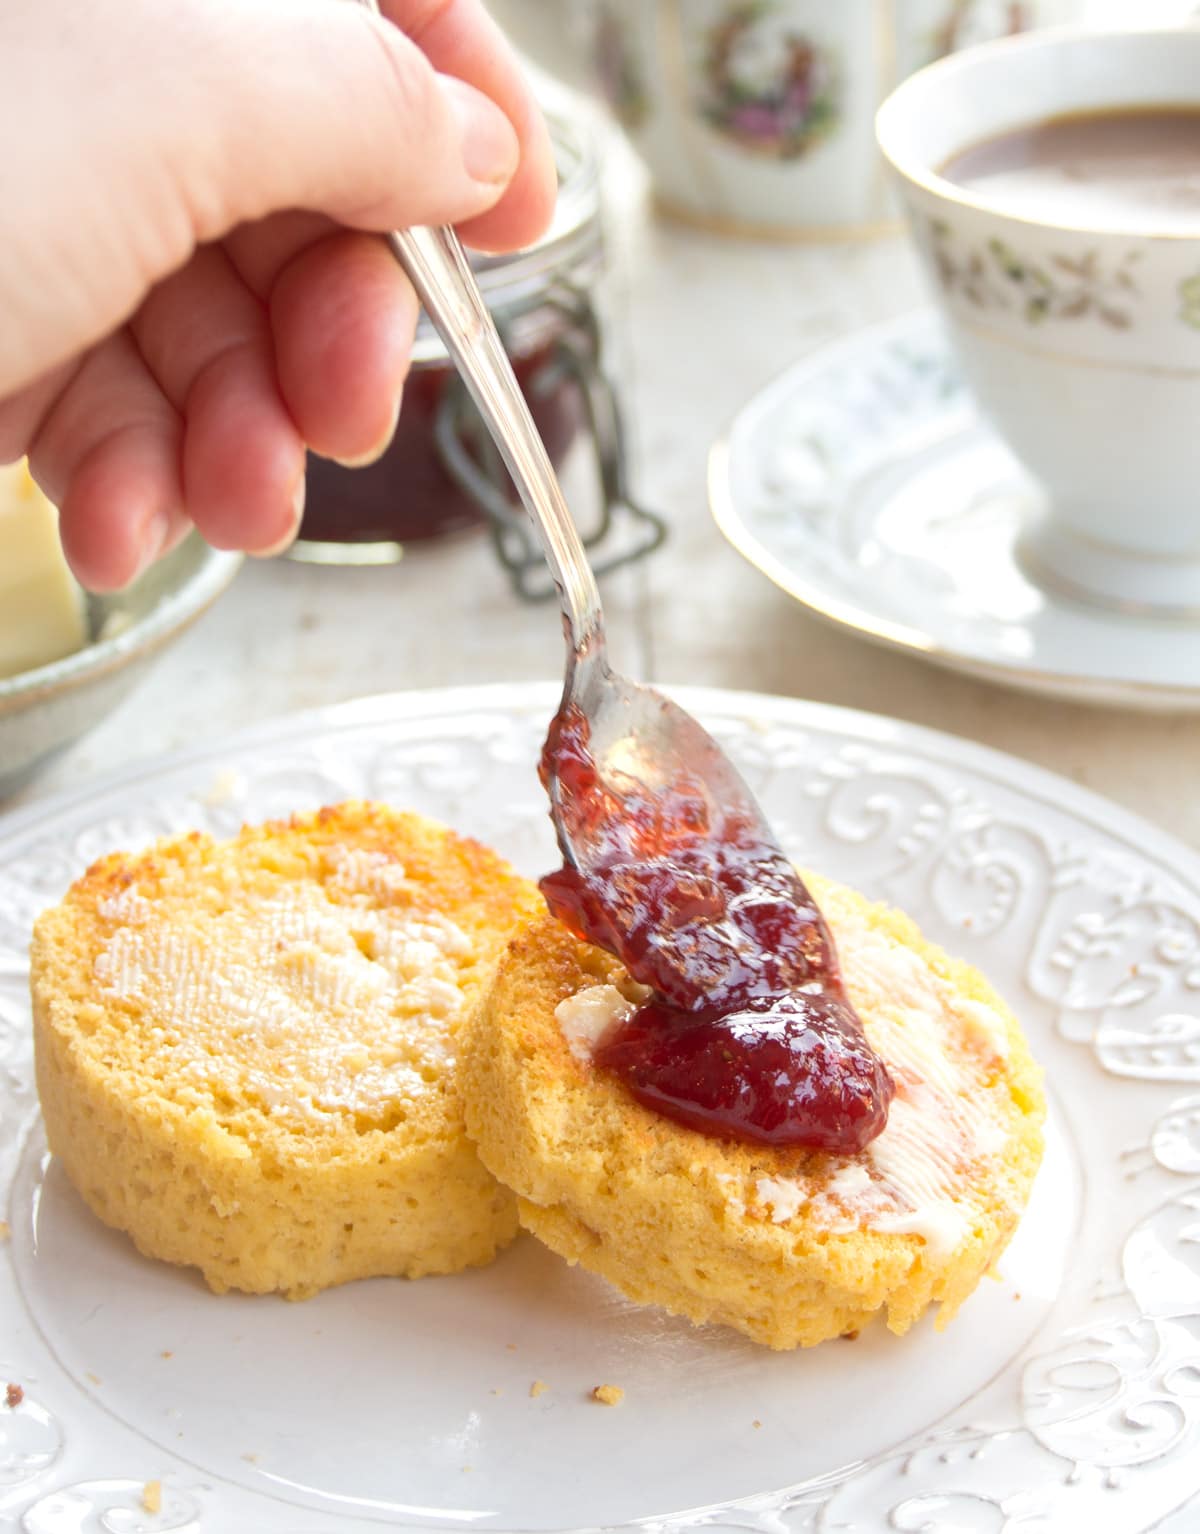 An English muffin toasted, buttered and being topped with a spoonful of strawberry jam.